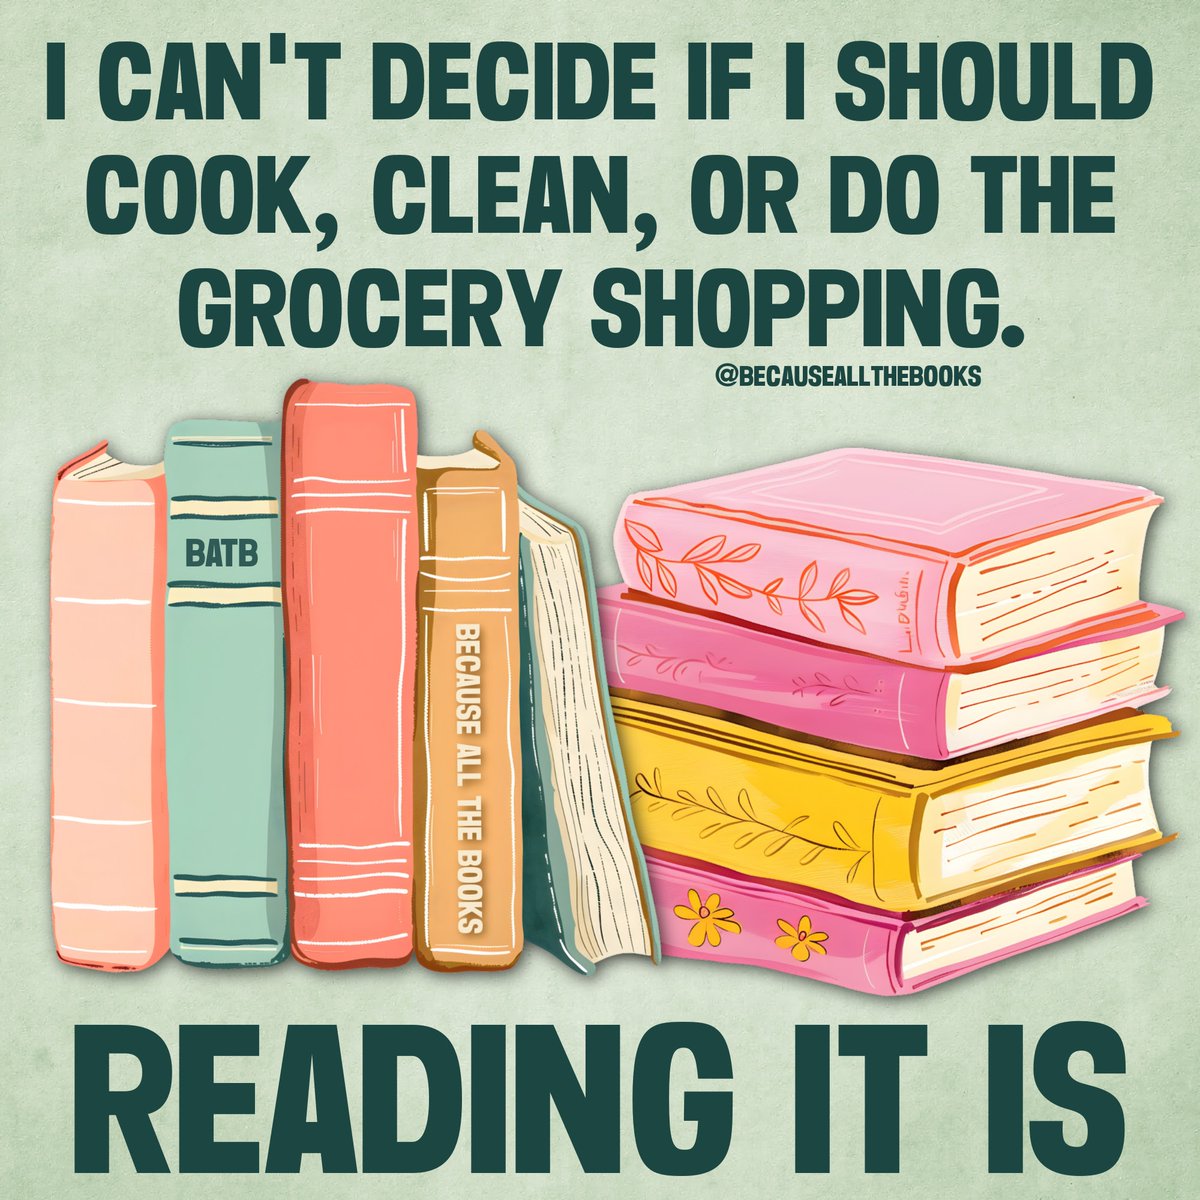 Hmmmm...what should we ignore today so we can read?

#BecauseAllTheBooks #TimeToRead #ReadingNow #AmReading #BooksForDays